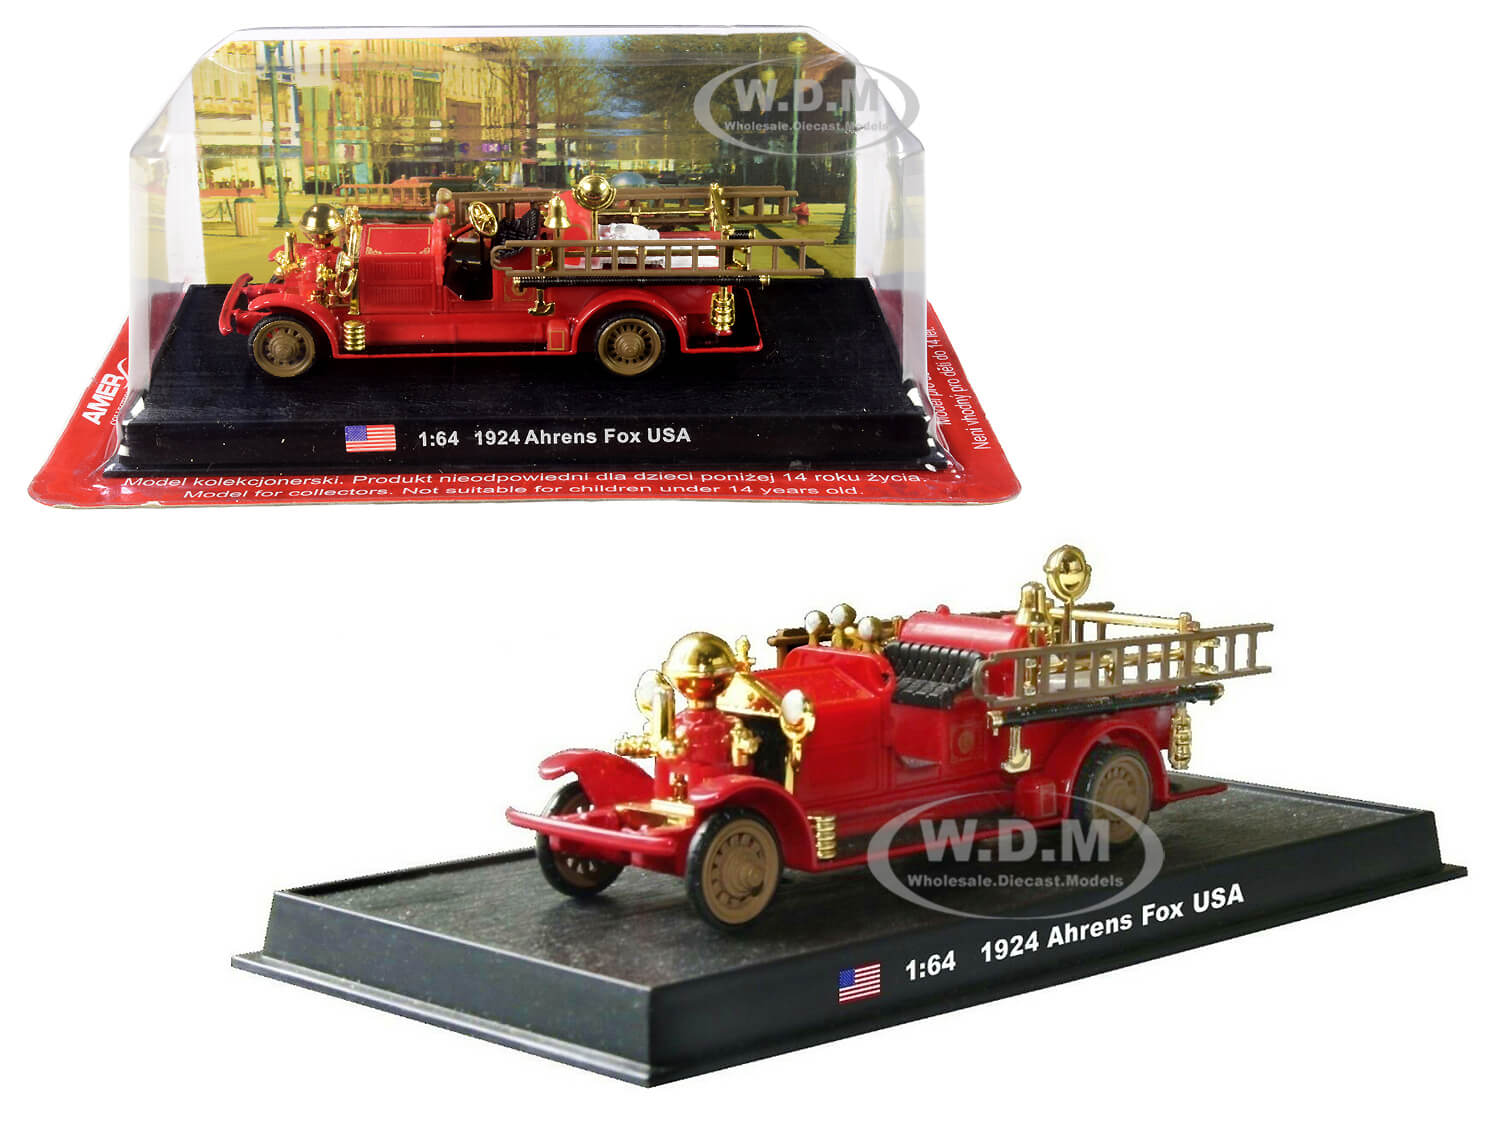 1924 Ahrens Fox Fire Engine Red and Gold 1/64 Diecast Model by Amercom